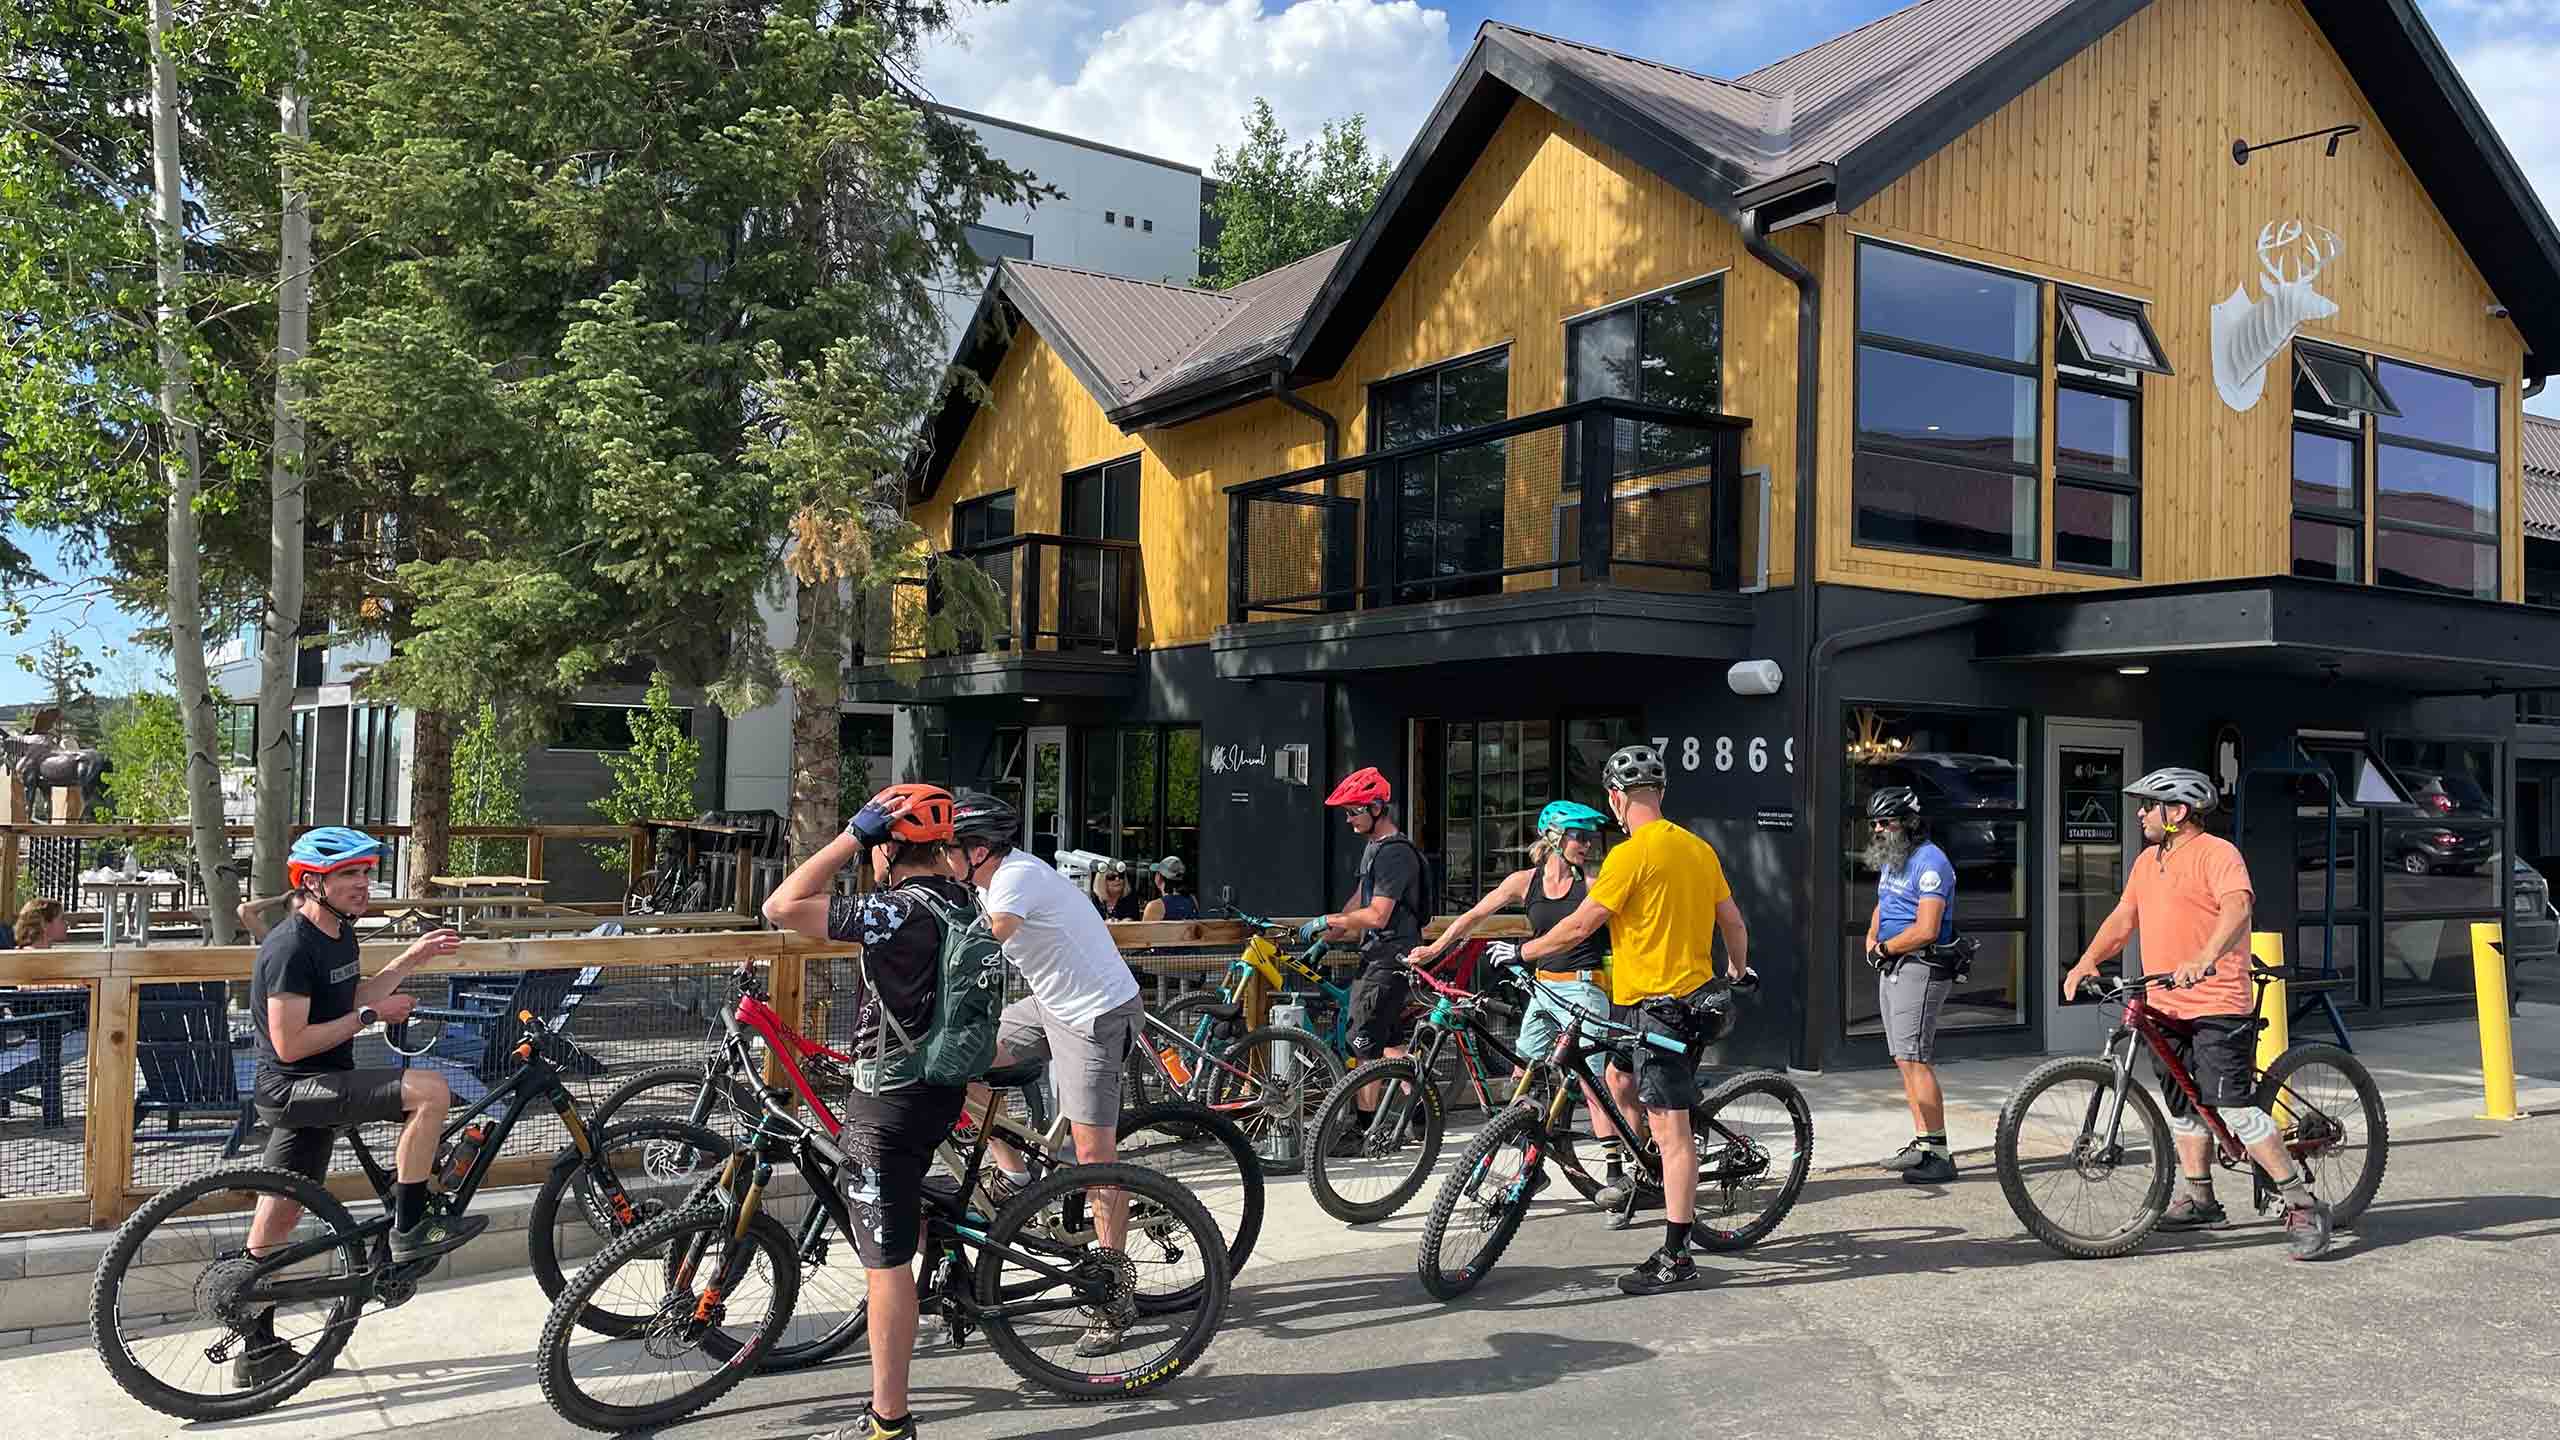 Gravity Haus Winter Park guests gathering outside with mountain bikes.